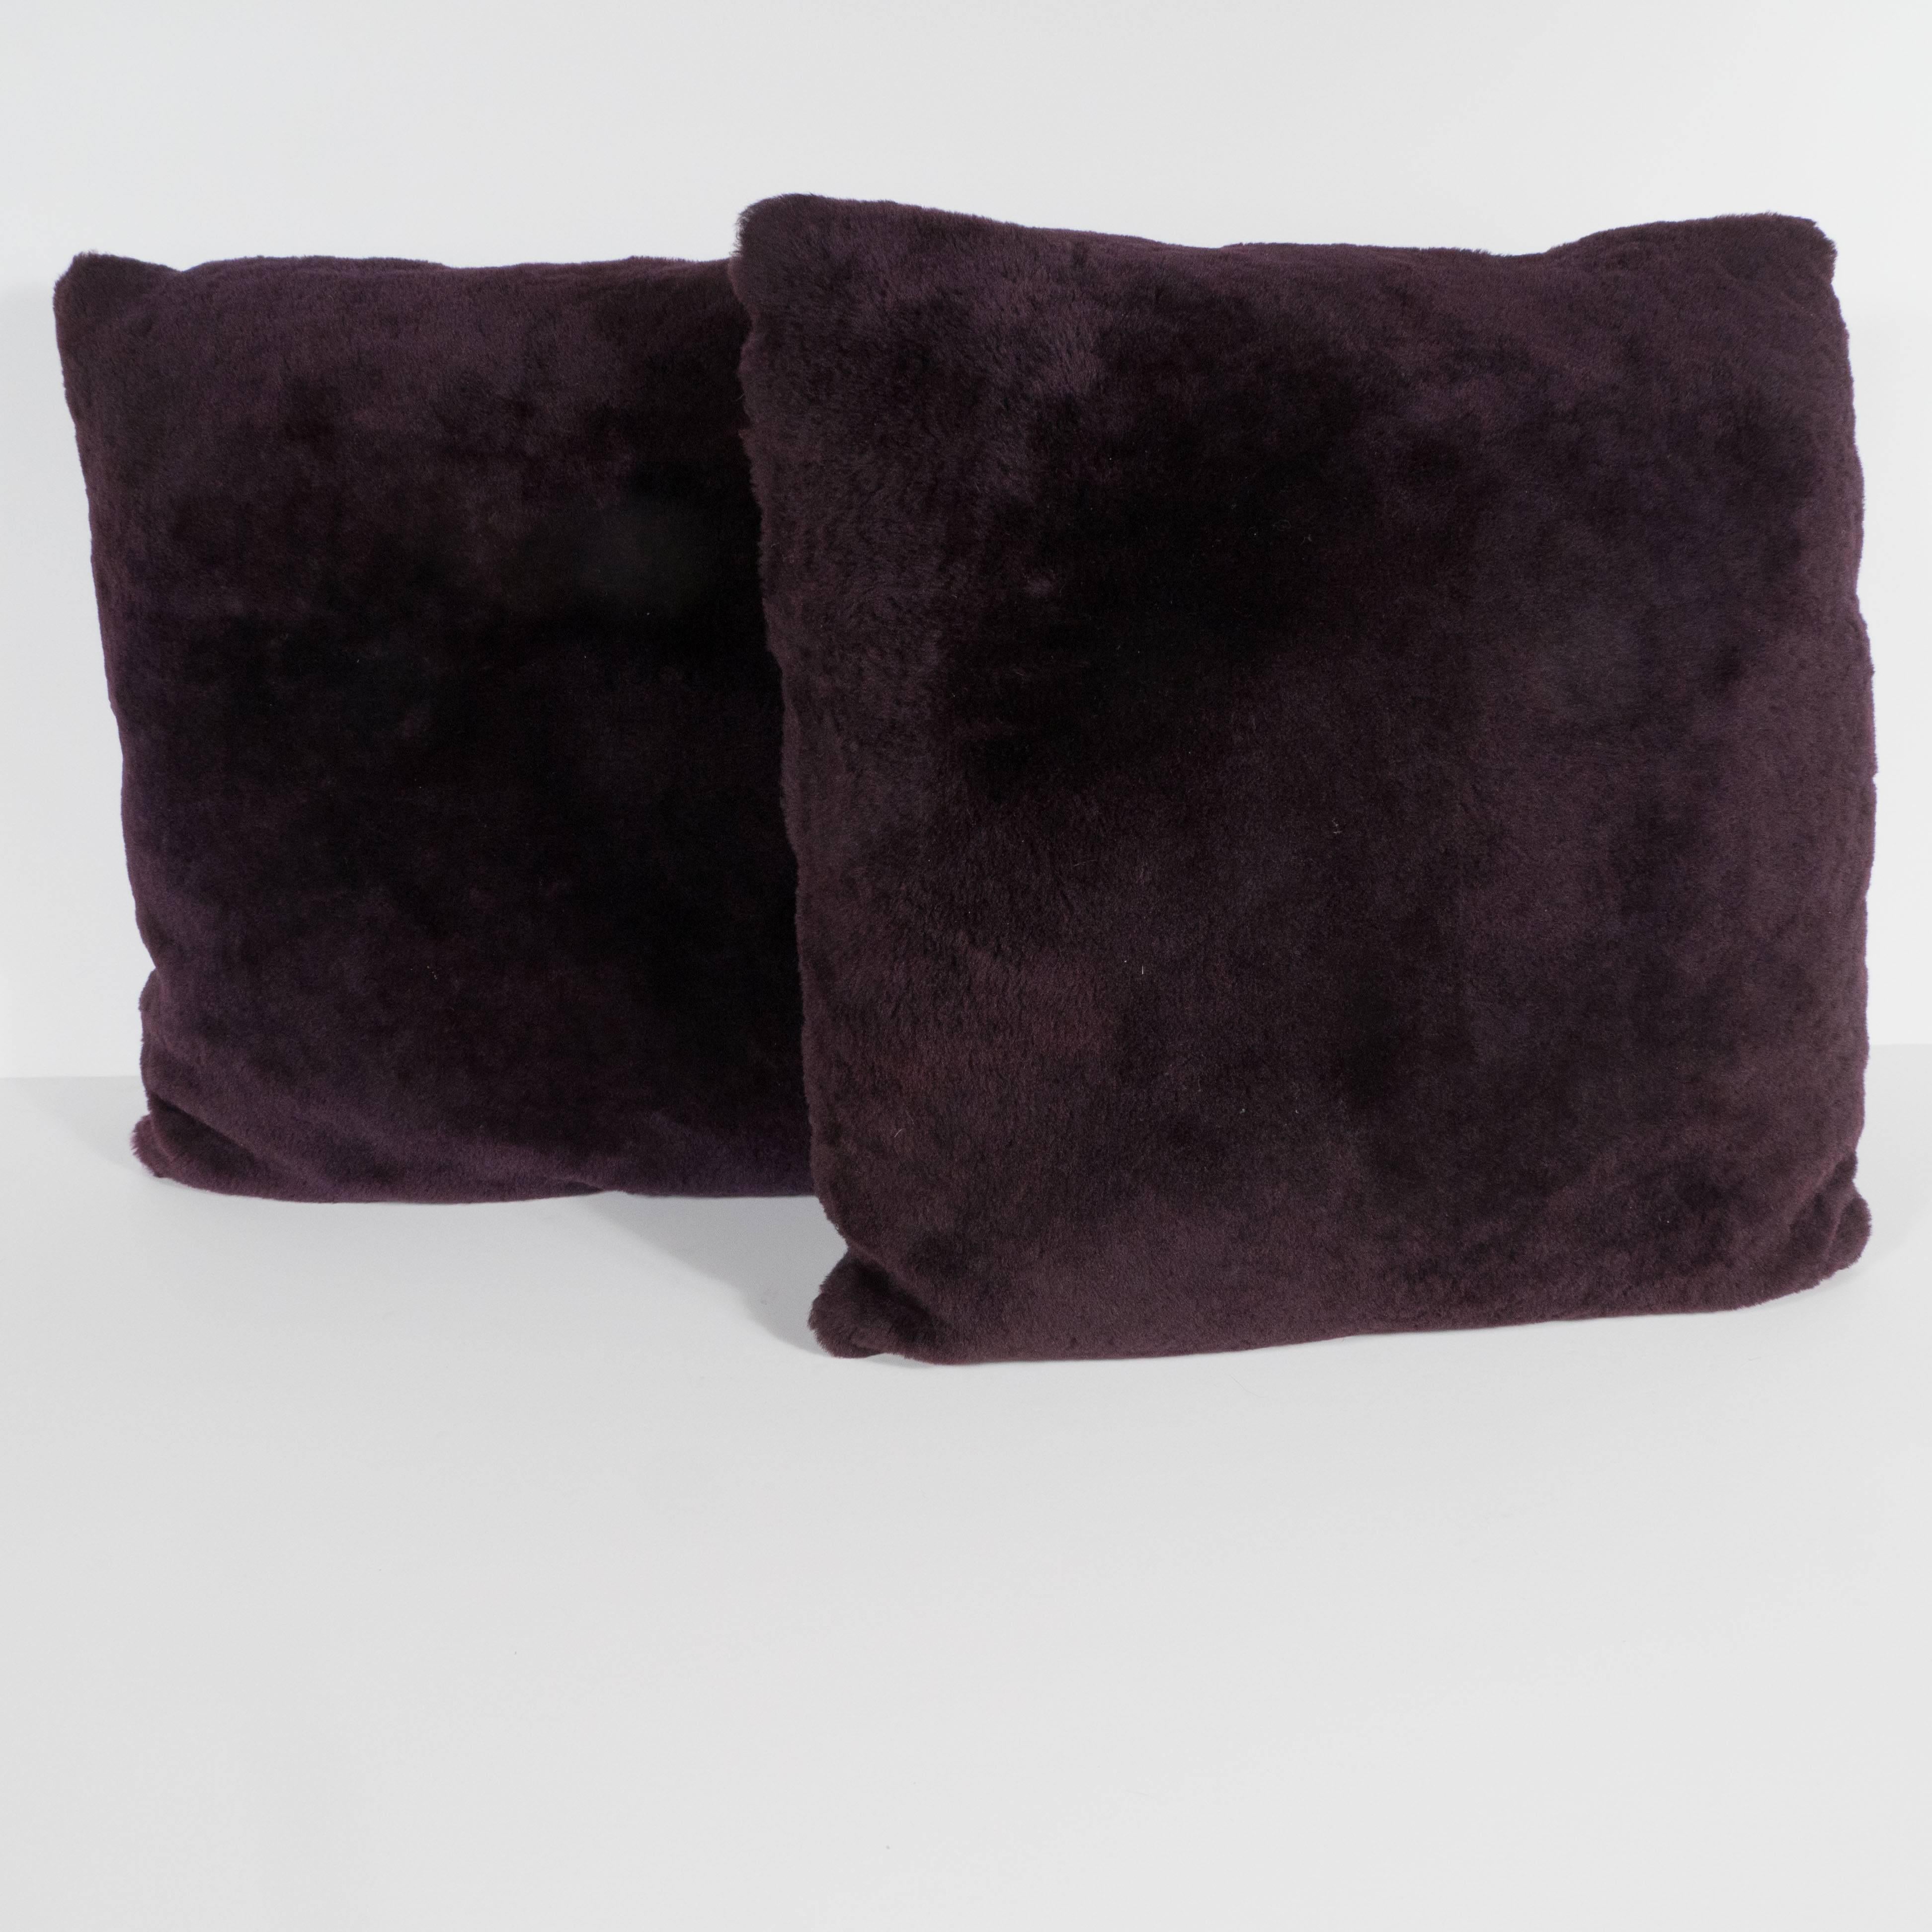 These stunning pillows have been upholstered in a luxe smoked amethyst mohair and Loro Piana cashmere. Their austere form and sumptous materials guarantee that they would be a perfect fit for virtually any style of interior from Classic Art Deco to